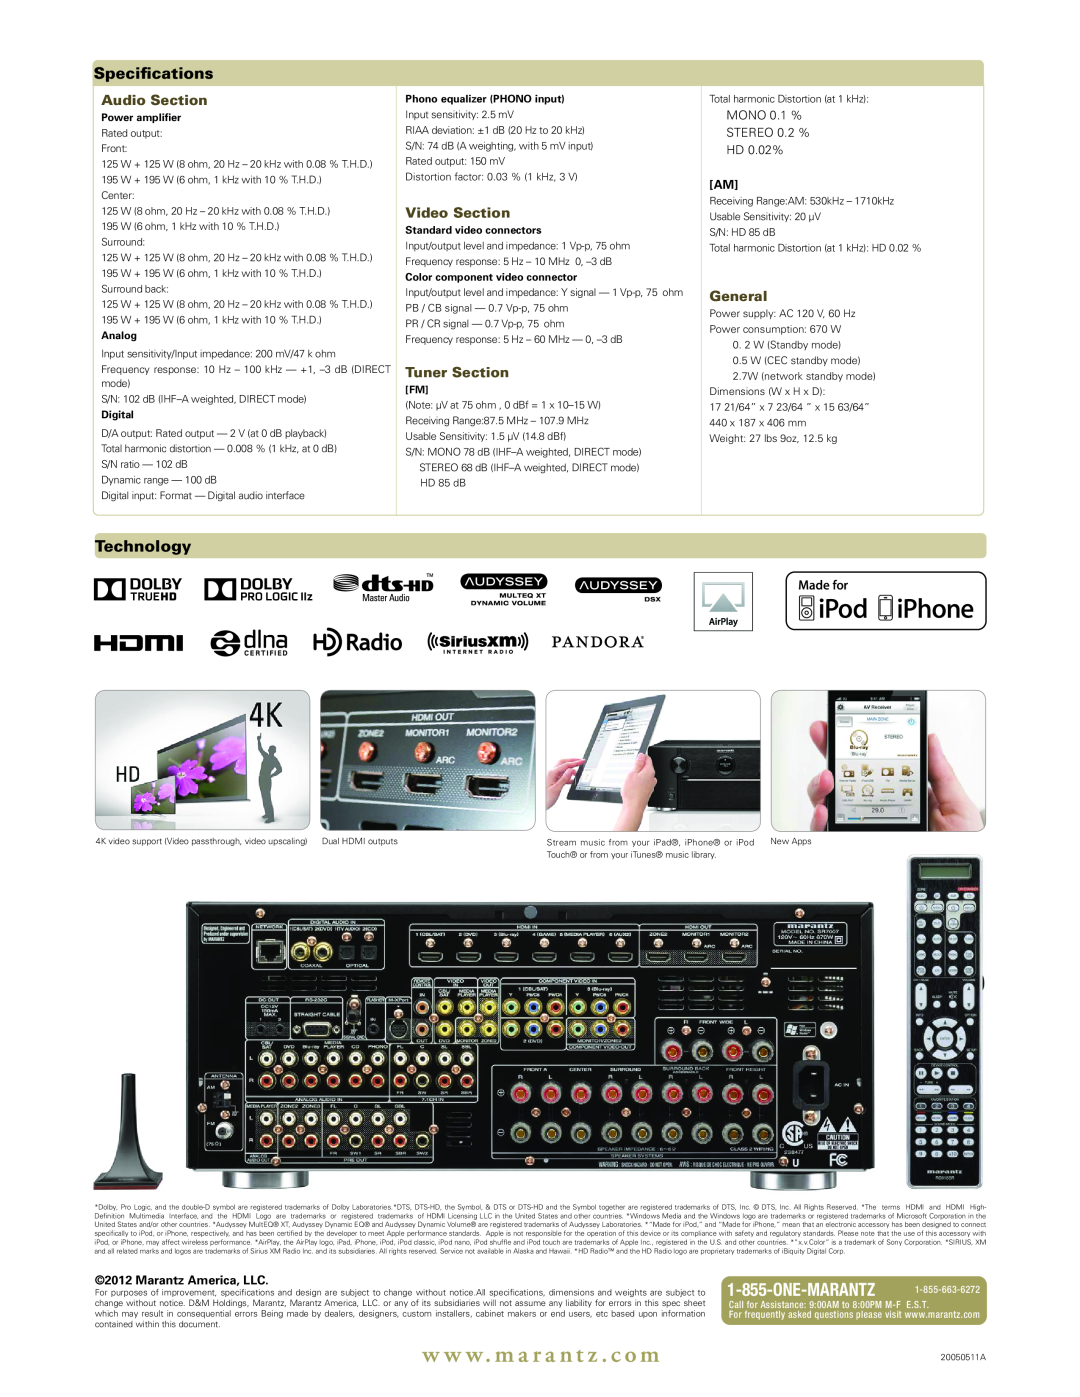 Marantz SR7007 manual One-Marantz, Specifications, Technology, Audio Section, Video Section, Tuner Section, General, Analog 